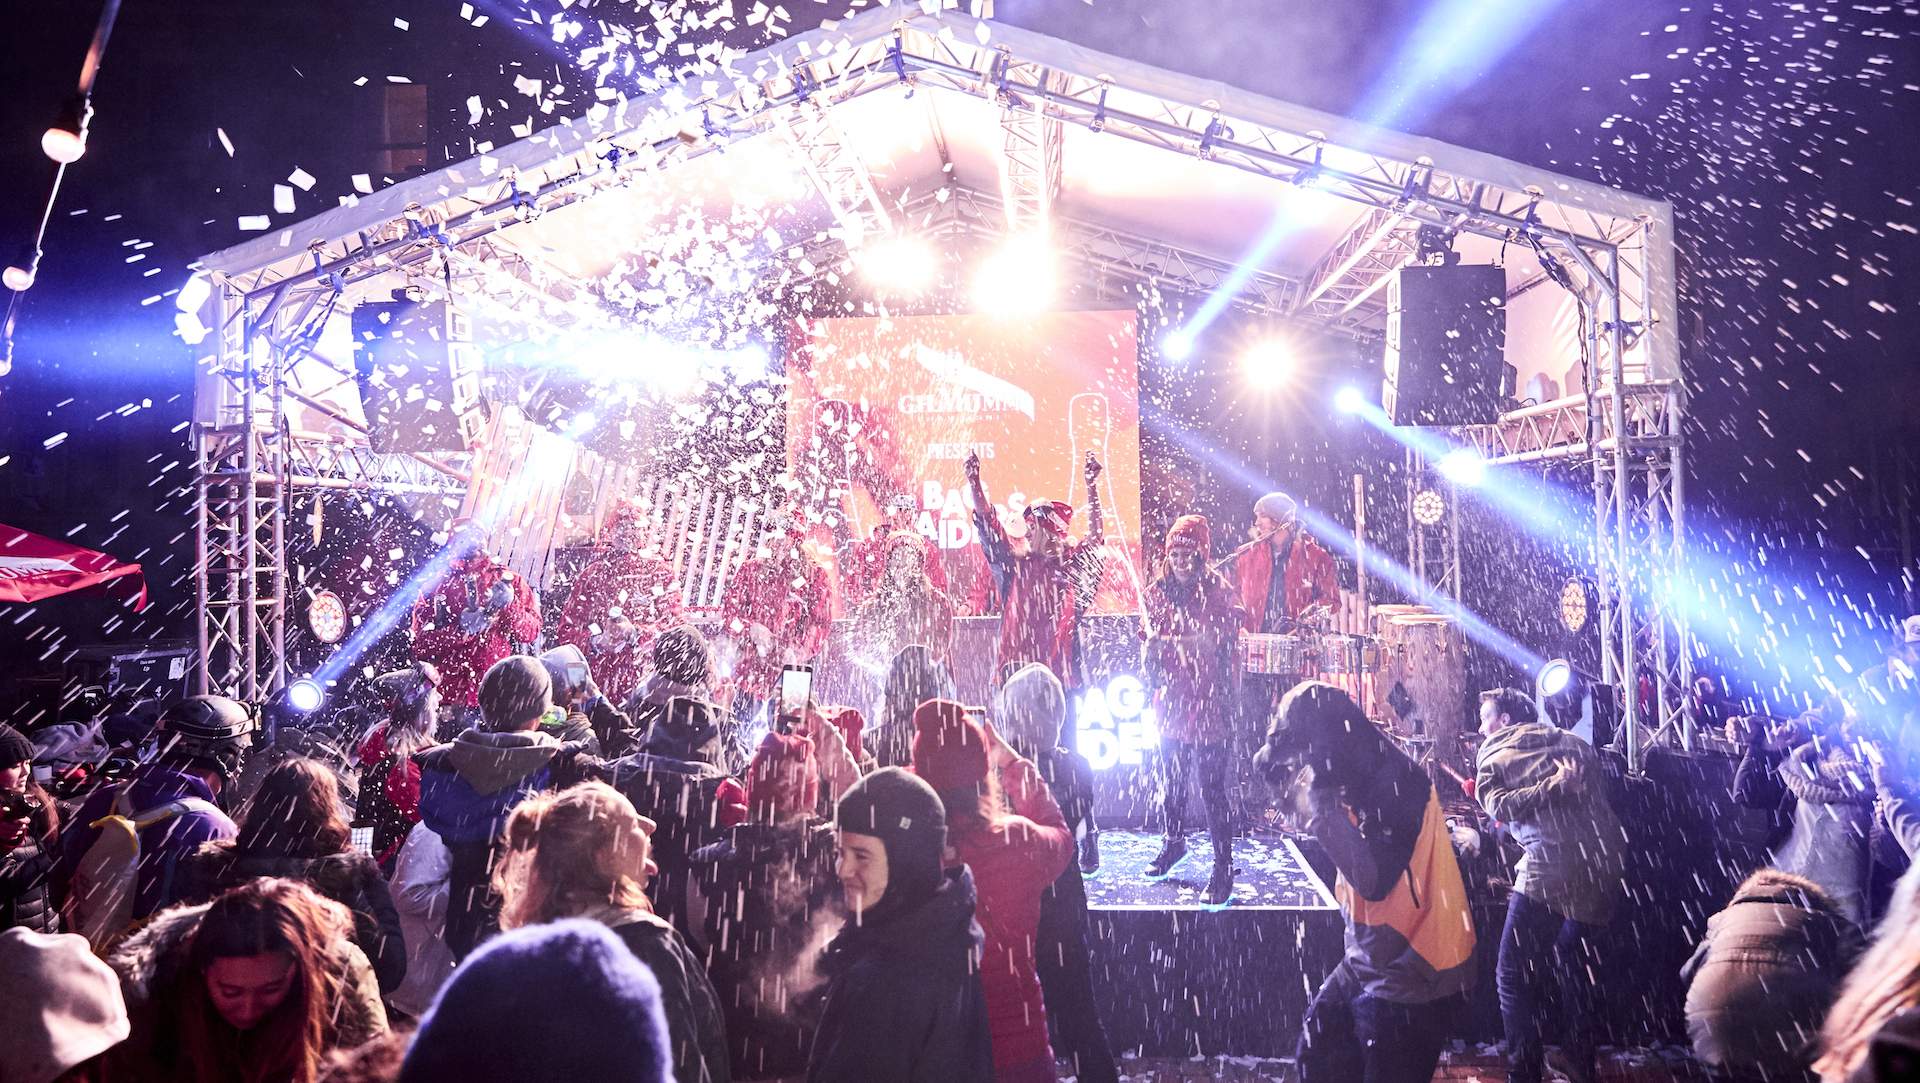 Open Champagne with a Ski at This Free Snow Party